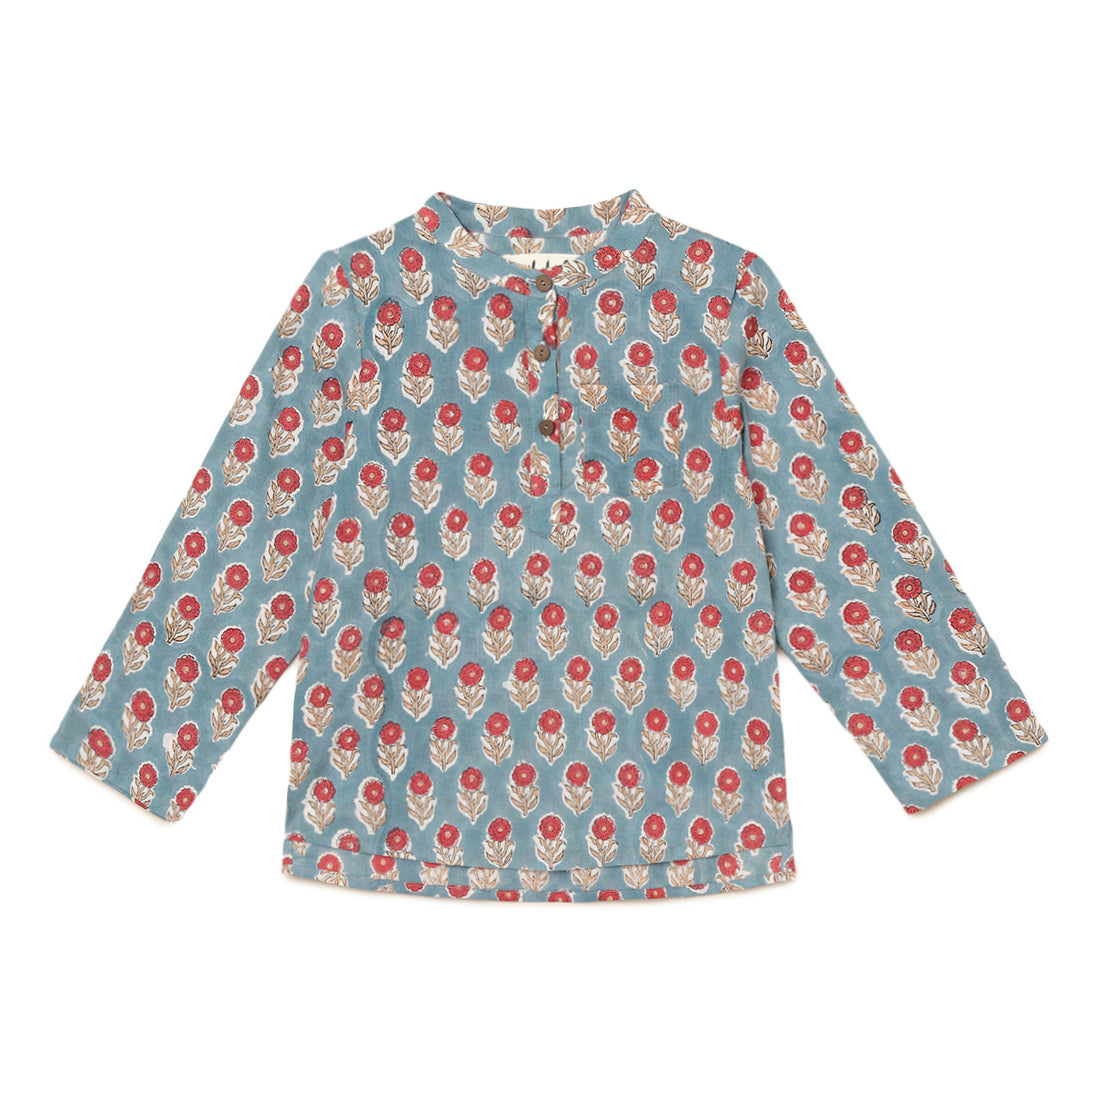 Boys Cotton Teal & Red full sleeves shirt 2 yrs to 6 yrs - Front